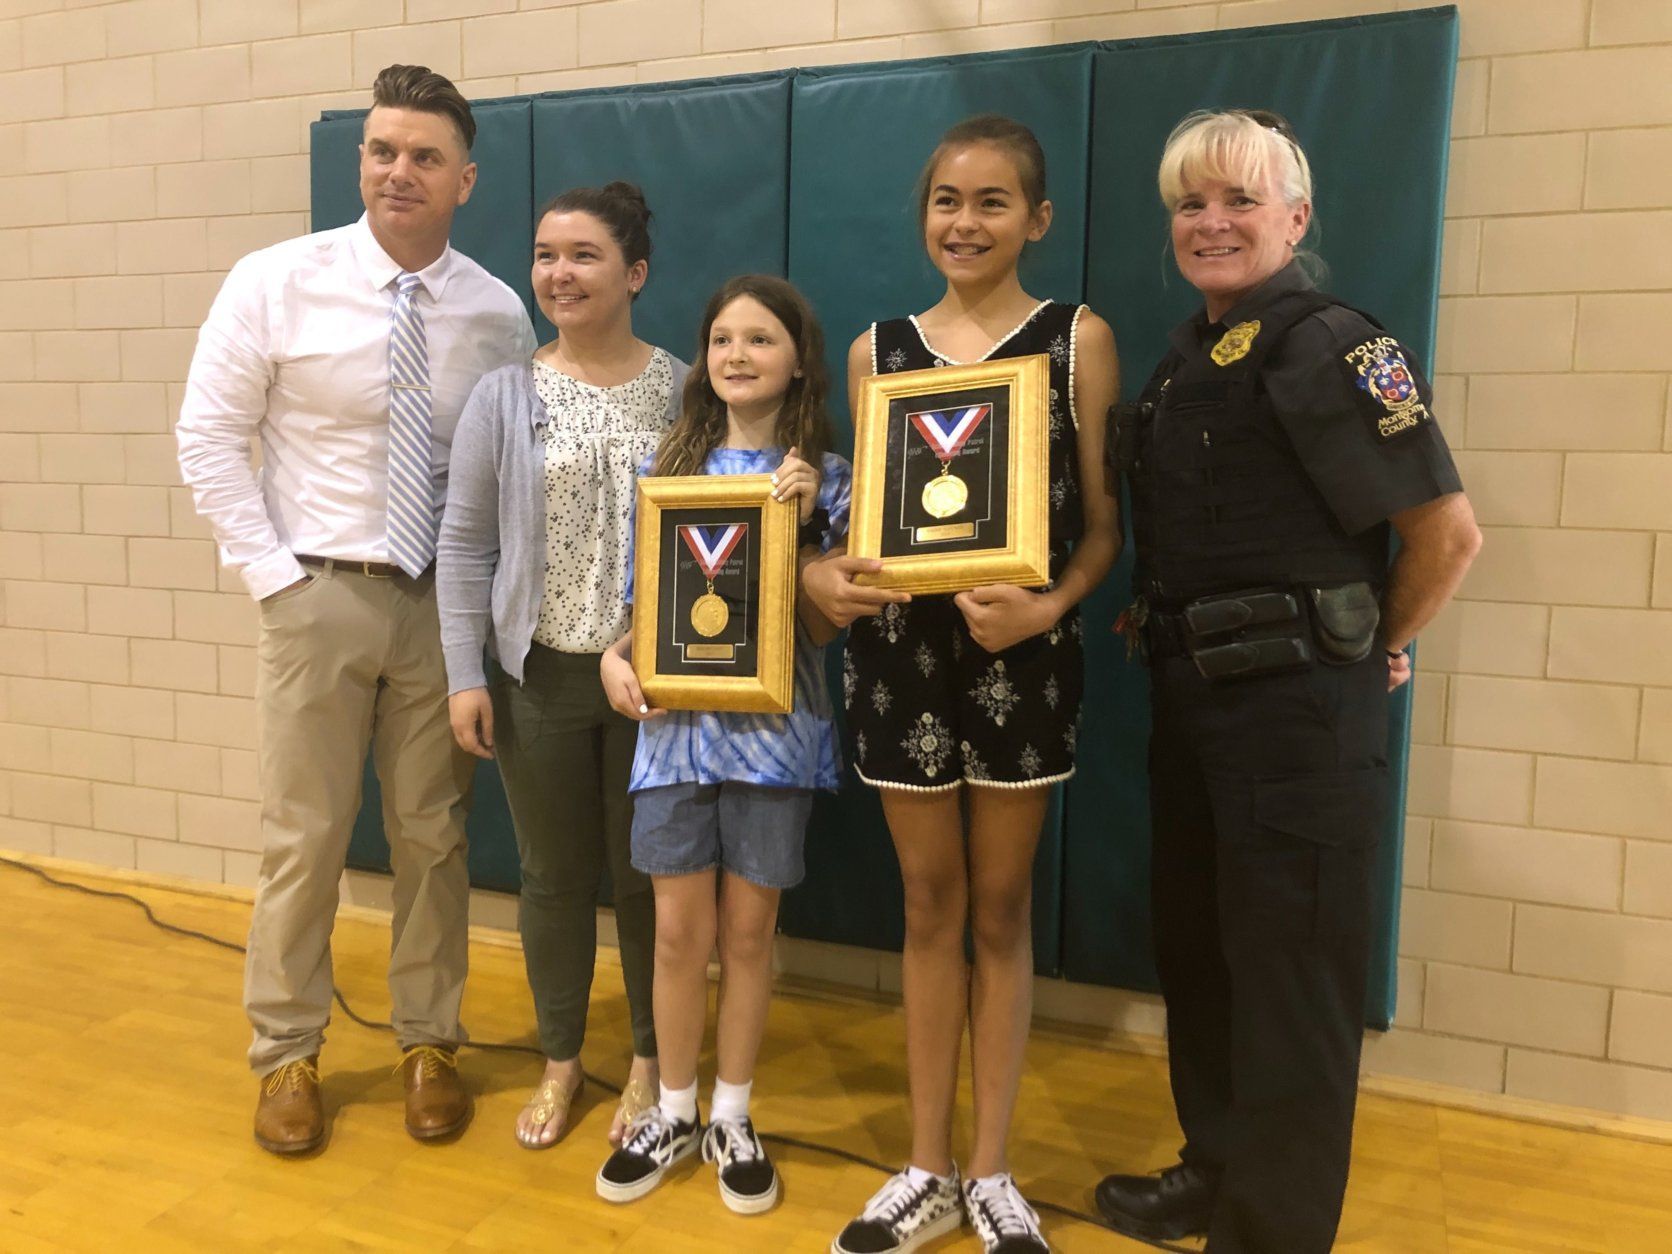 Their bravery was honored Tuesday with the highest school safety patrol honor, the Lifesaving Medal, presented by AAA. (WTOP/Melissa Howell)